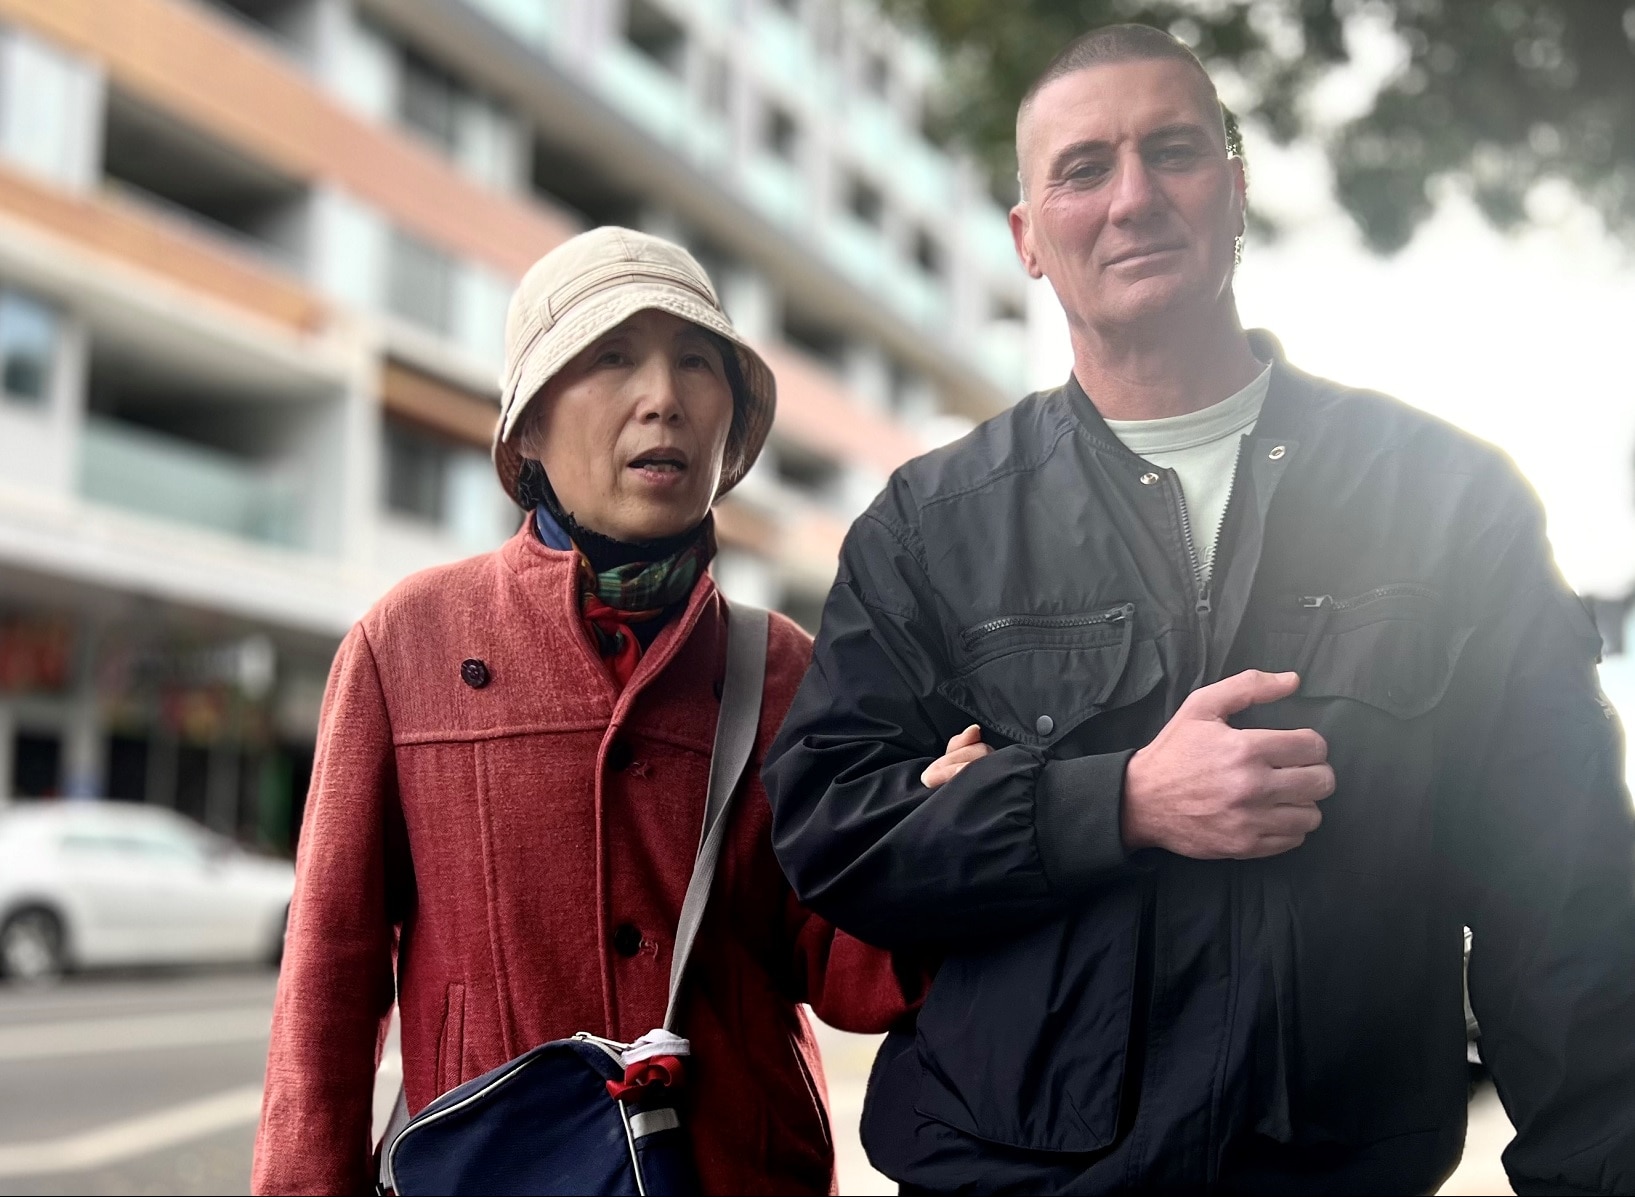 An elderly Asian woman standing next to a larger, middle-aged Caucasian male.